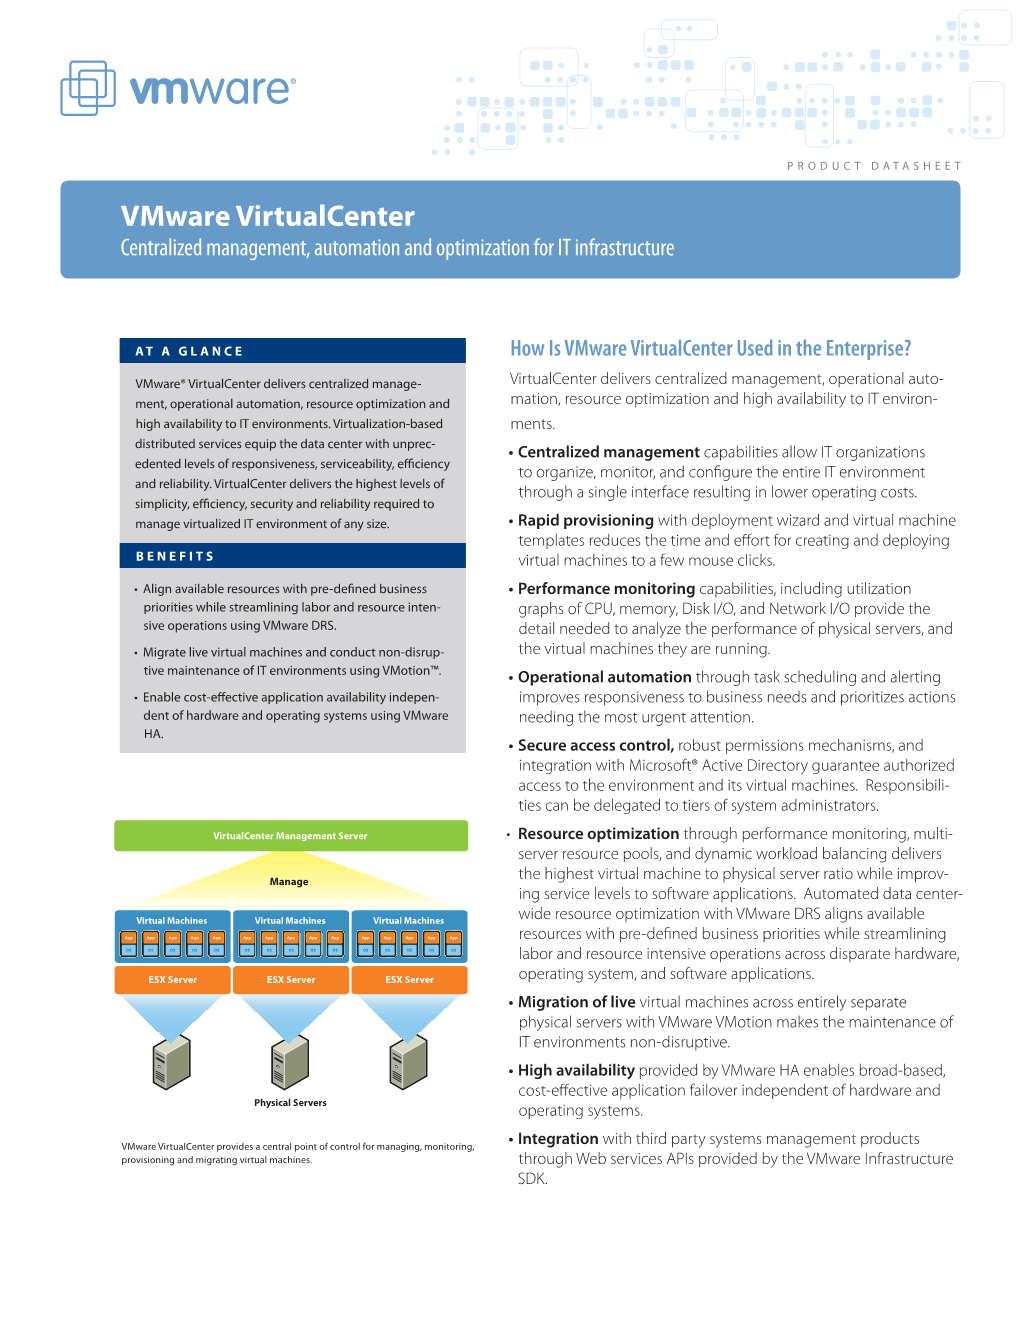 Vmware Virtualcenter Centralized Management, Automation and Optimization for IT Infrastructure